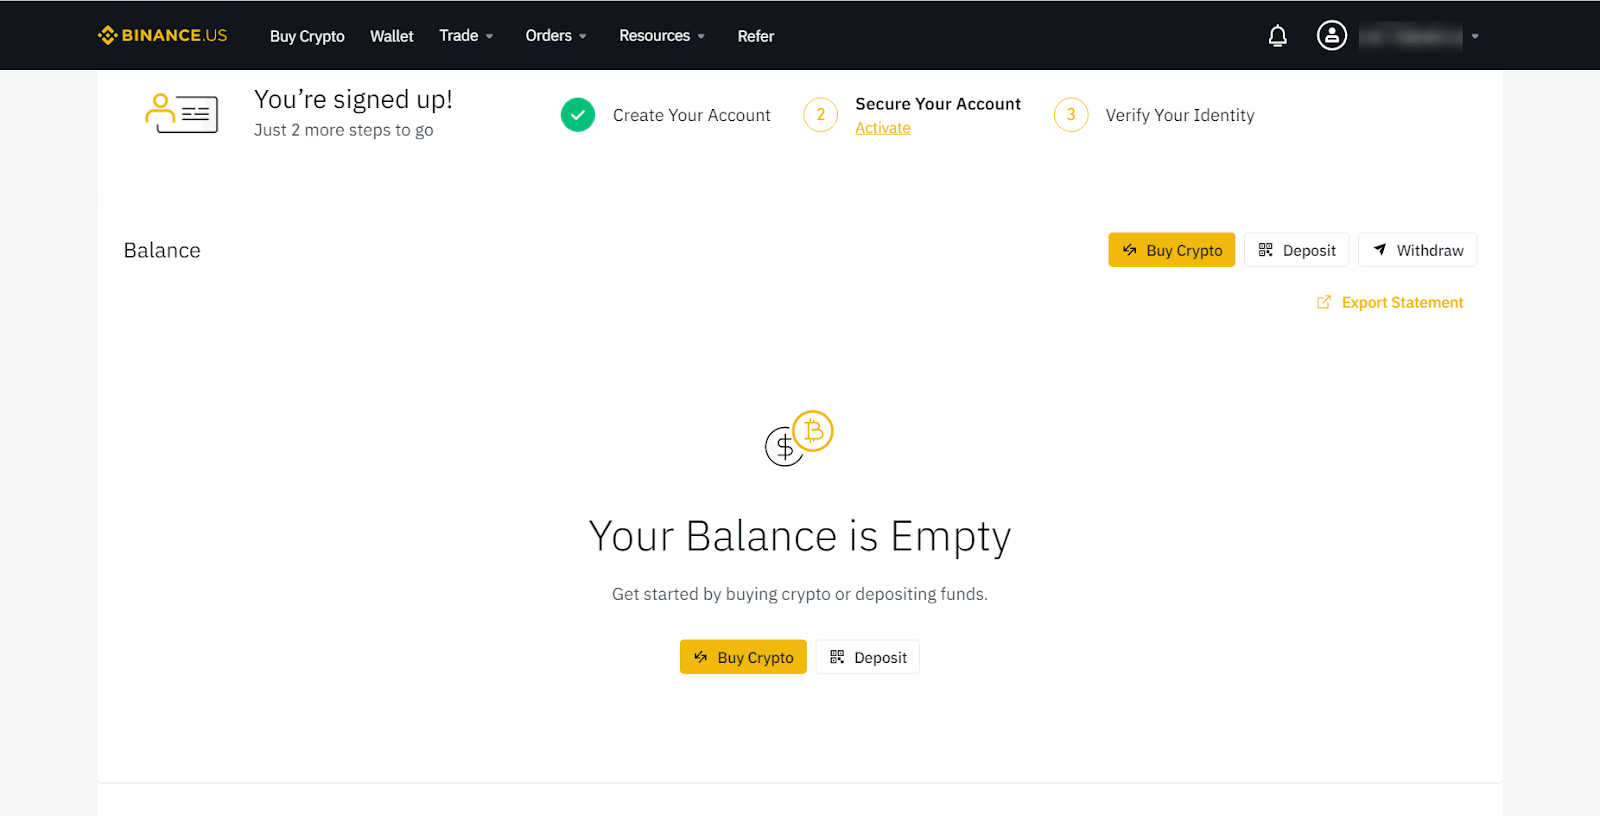 Overview of Binance US — Deposits and withdrawals